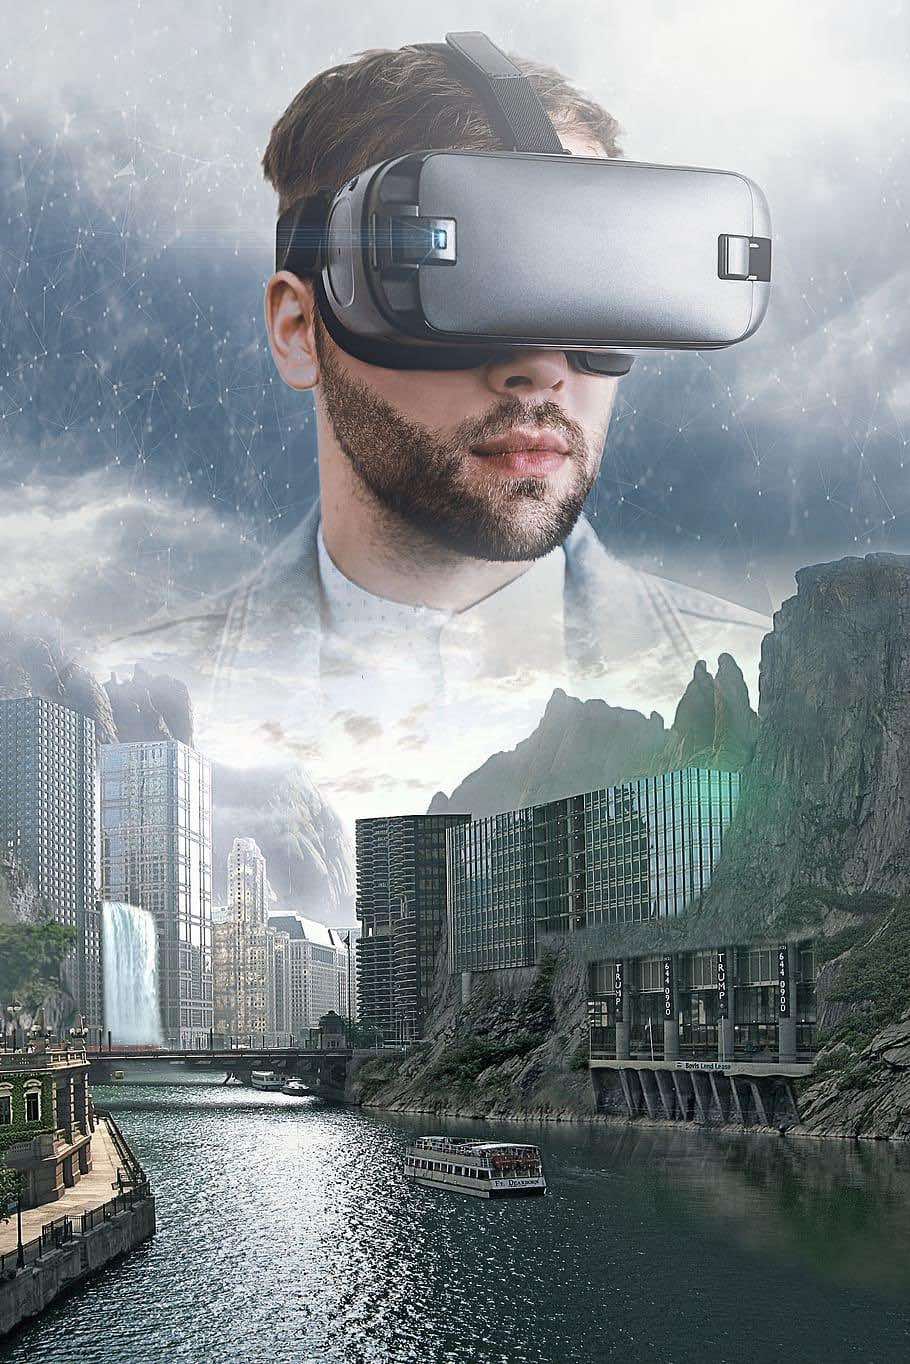 Composite Image of man wearing VR headset and imaginary scenery with river, mountains and high-tech buildings 